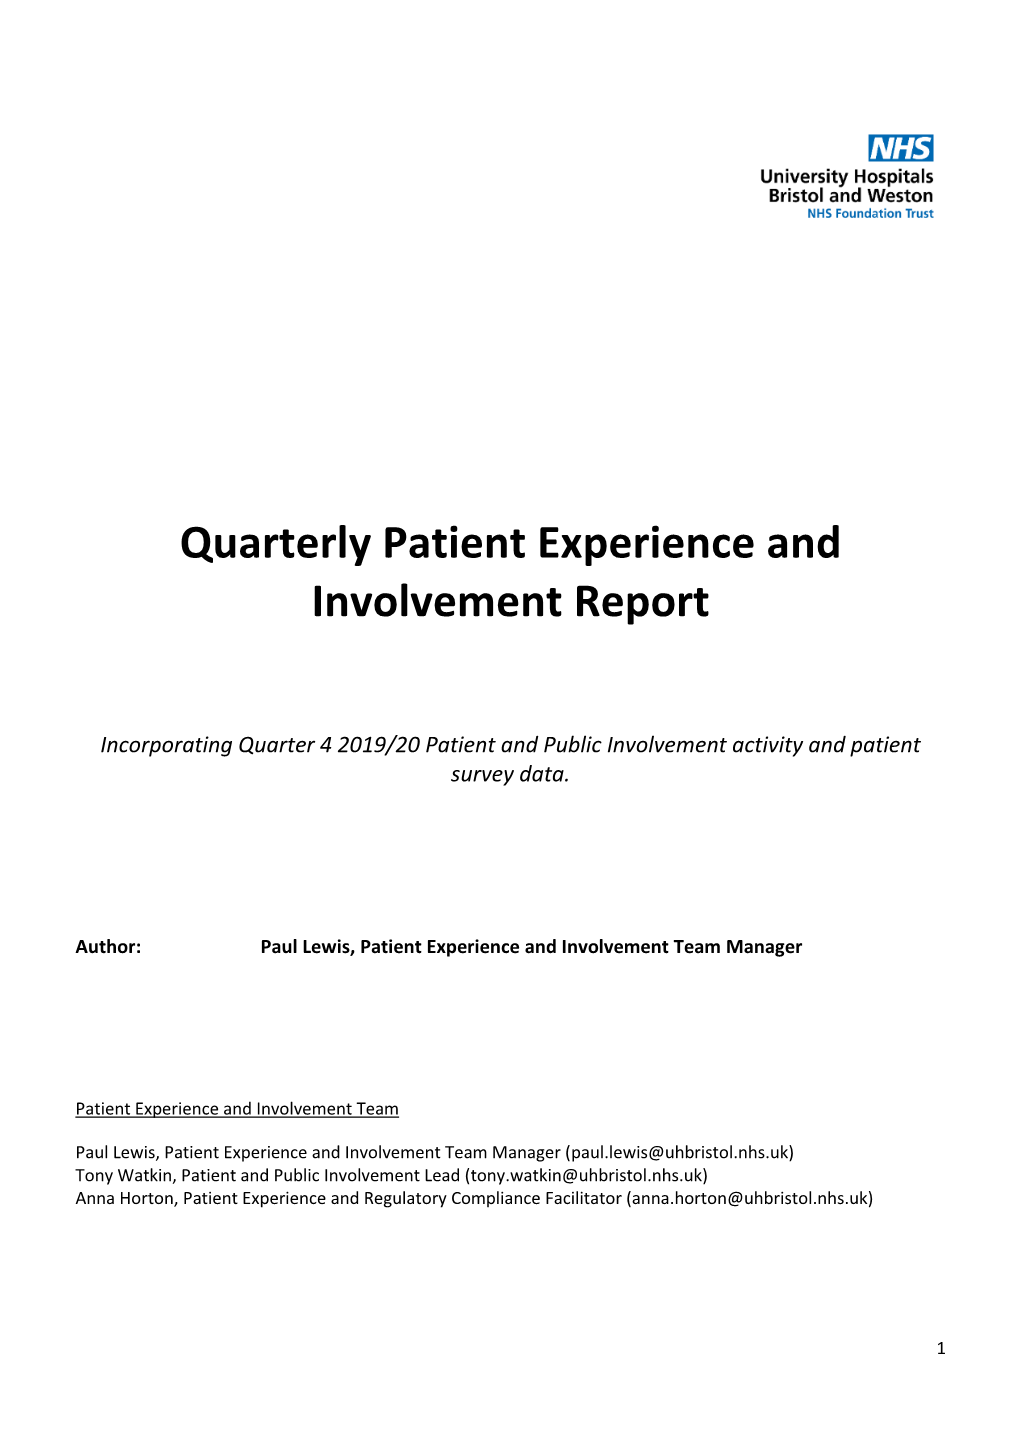 Quarterly Patient Experience and Involvement Report